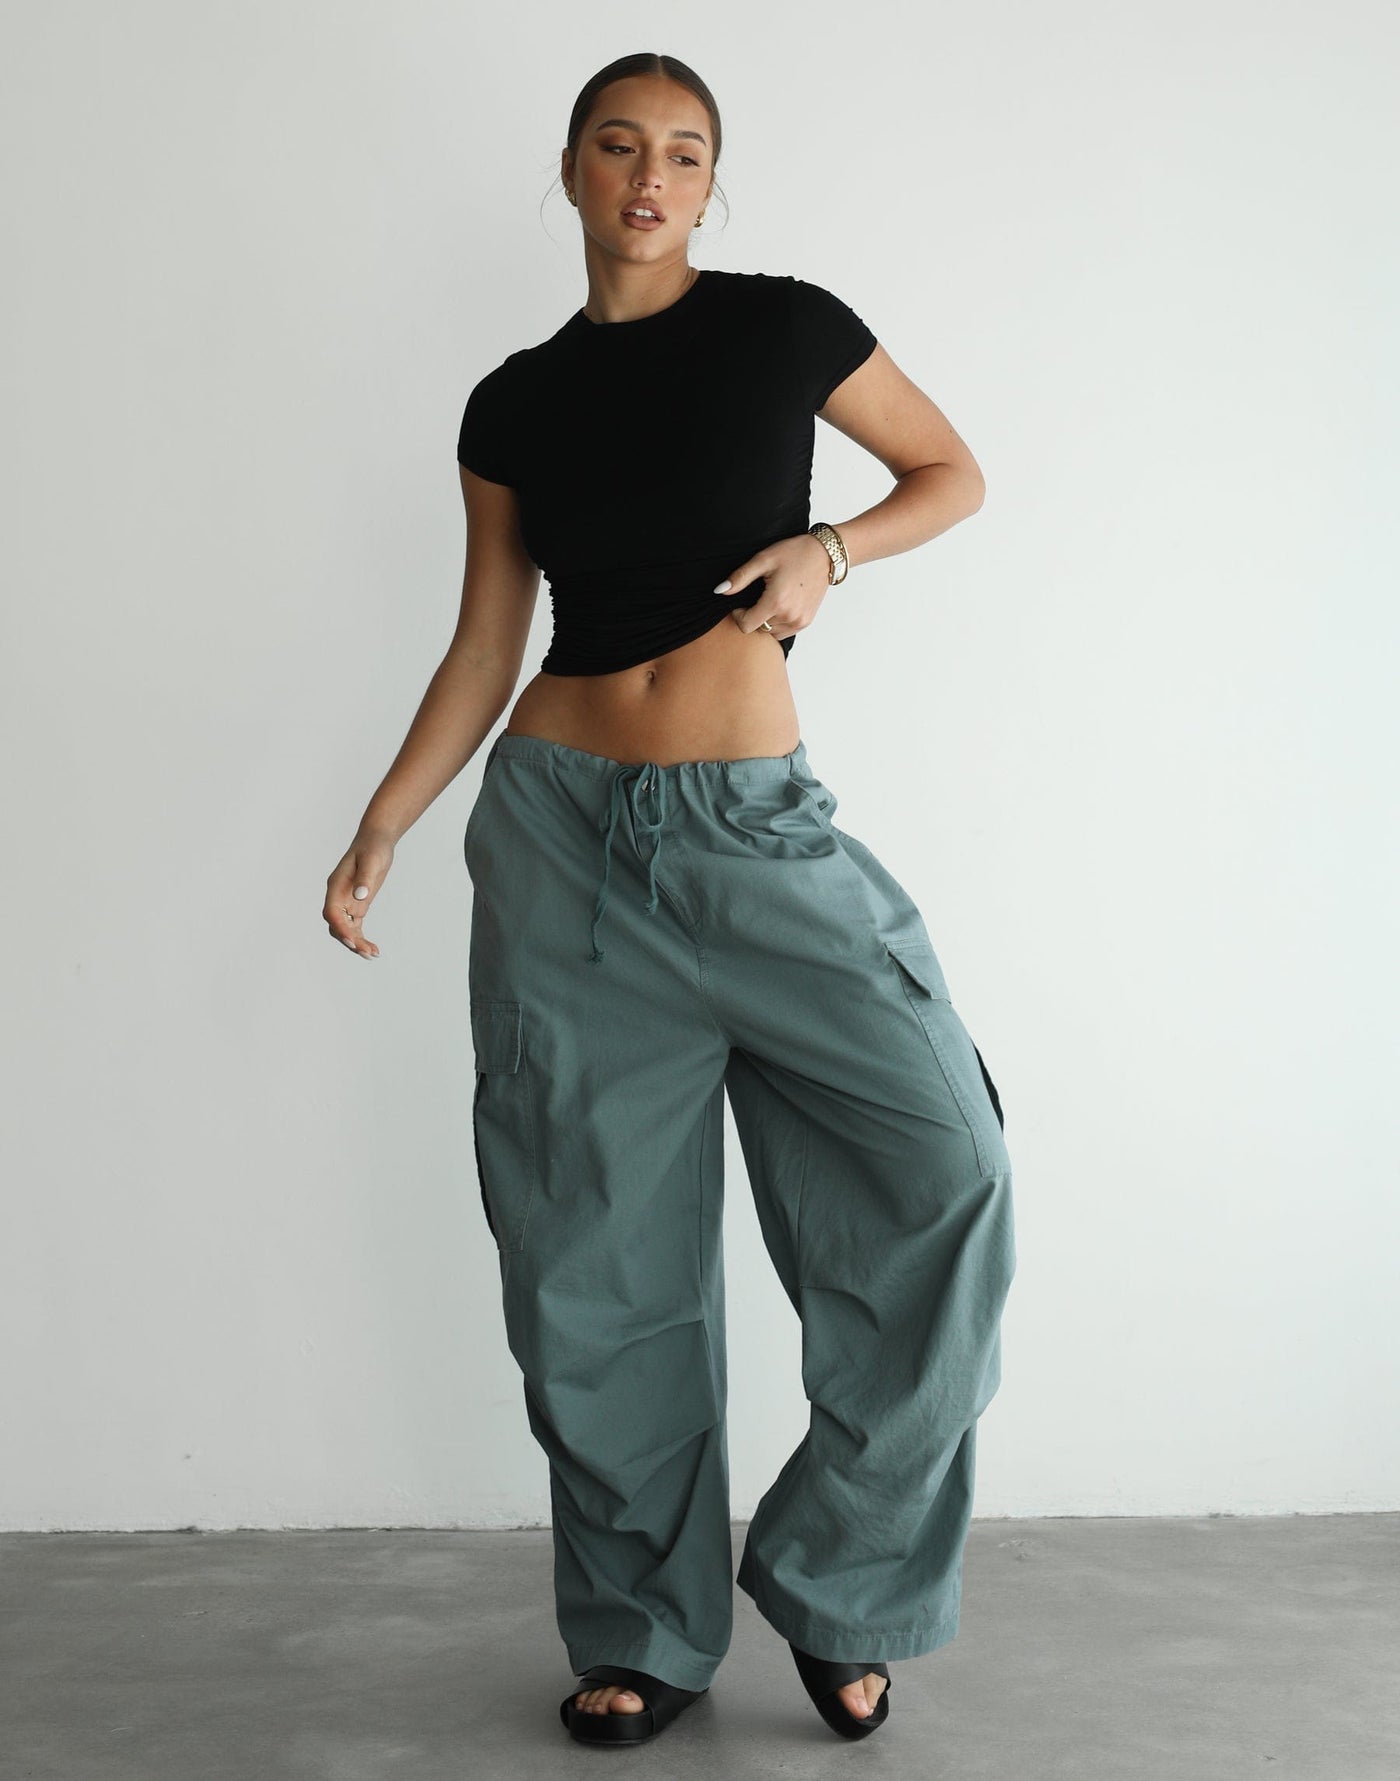 Utlity Pant (Slate) - By Lioness - Women's Pants - Charcoal Clothing